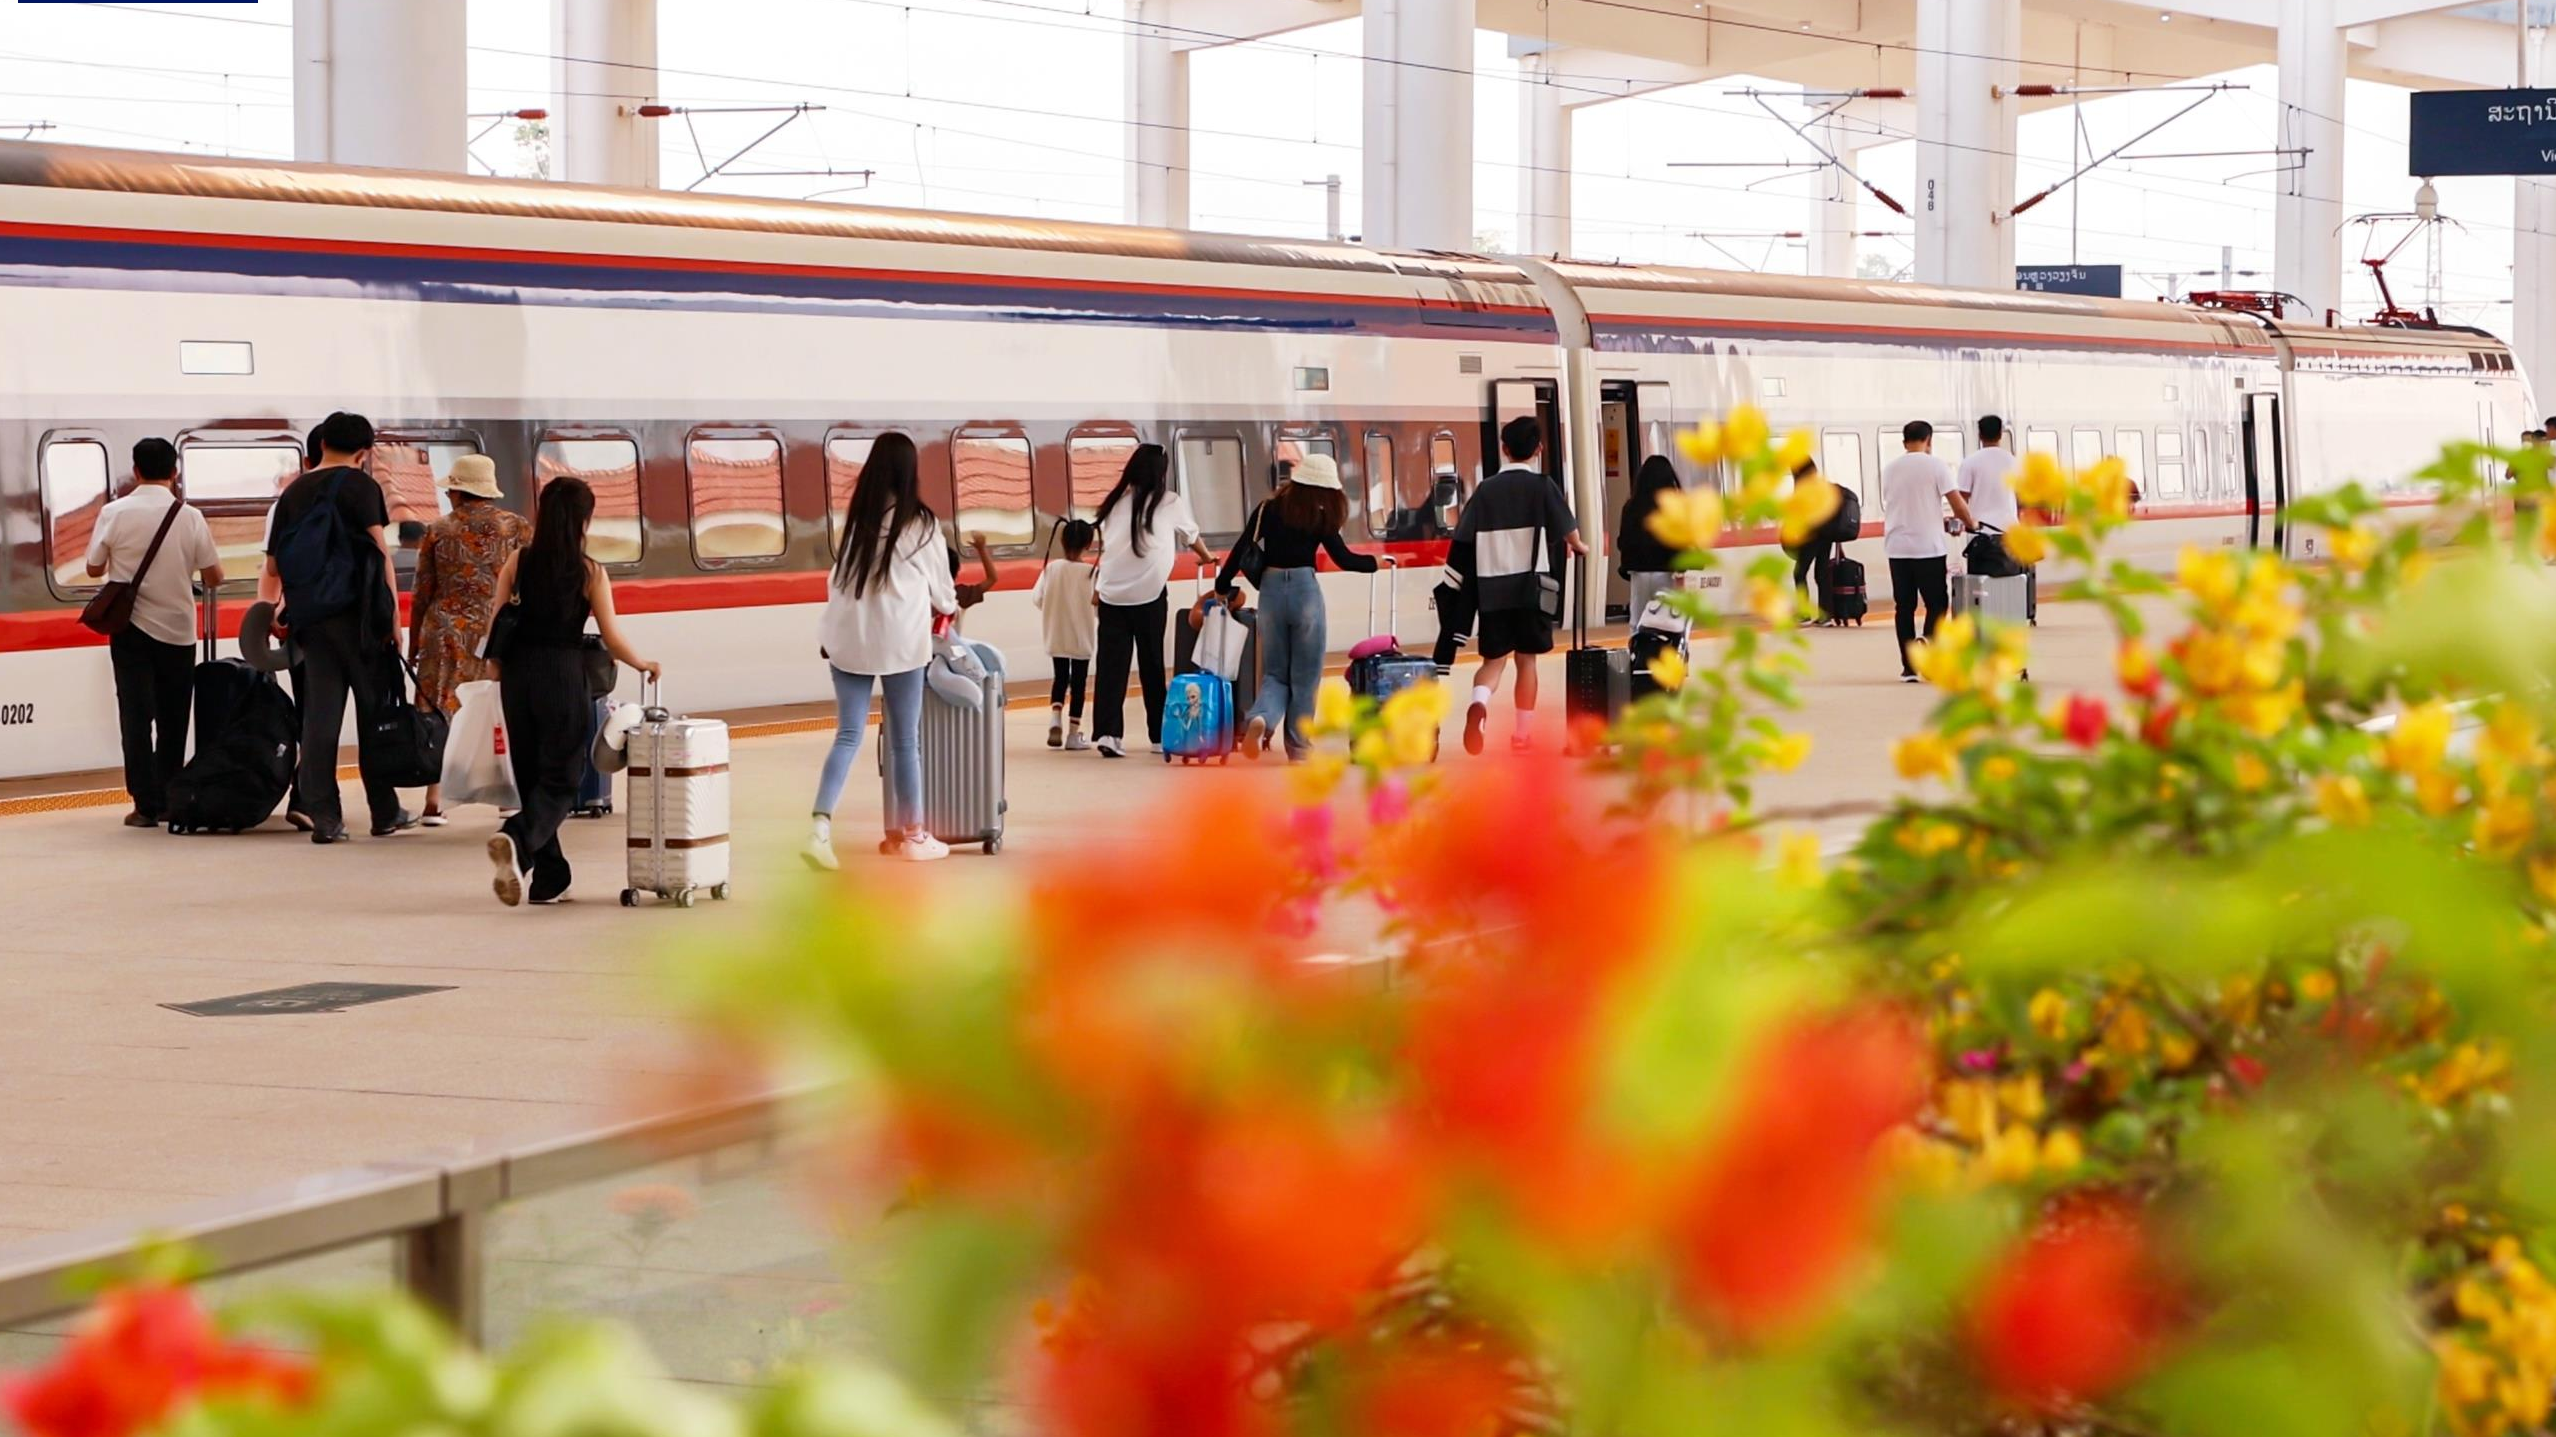 Passengers at the Vientiane Railway Station in Laos. /China Media Group